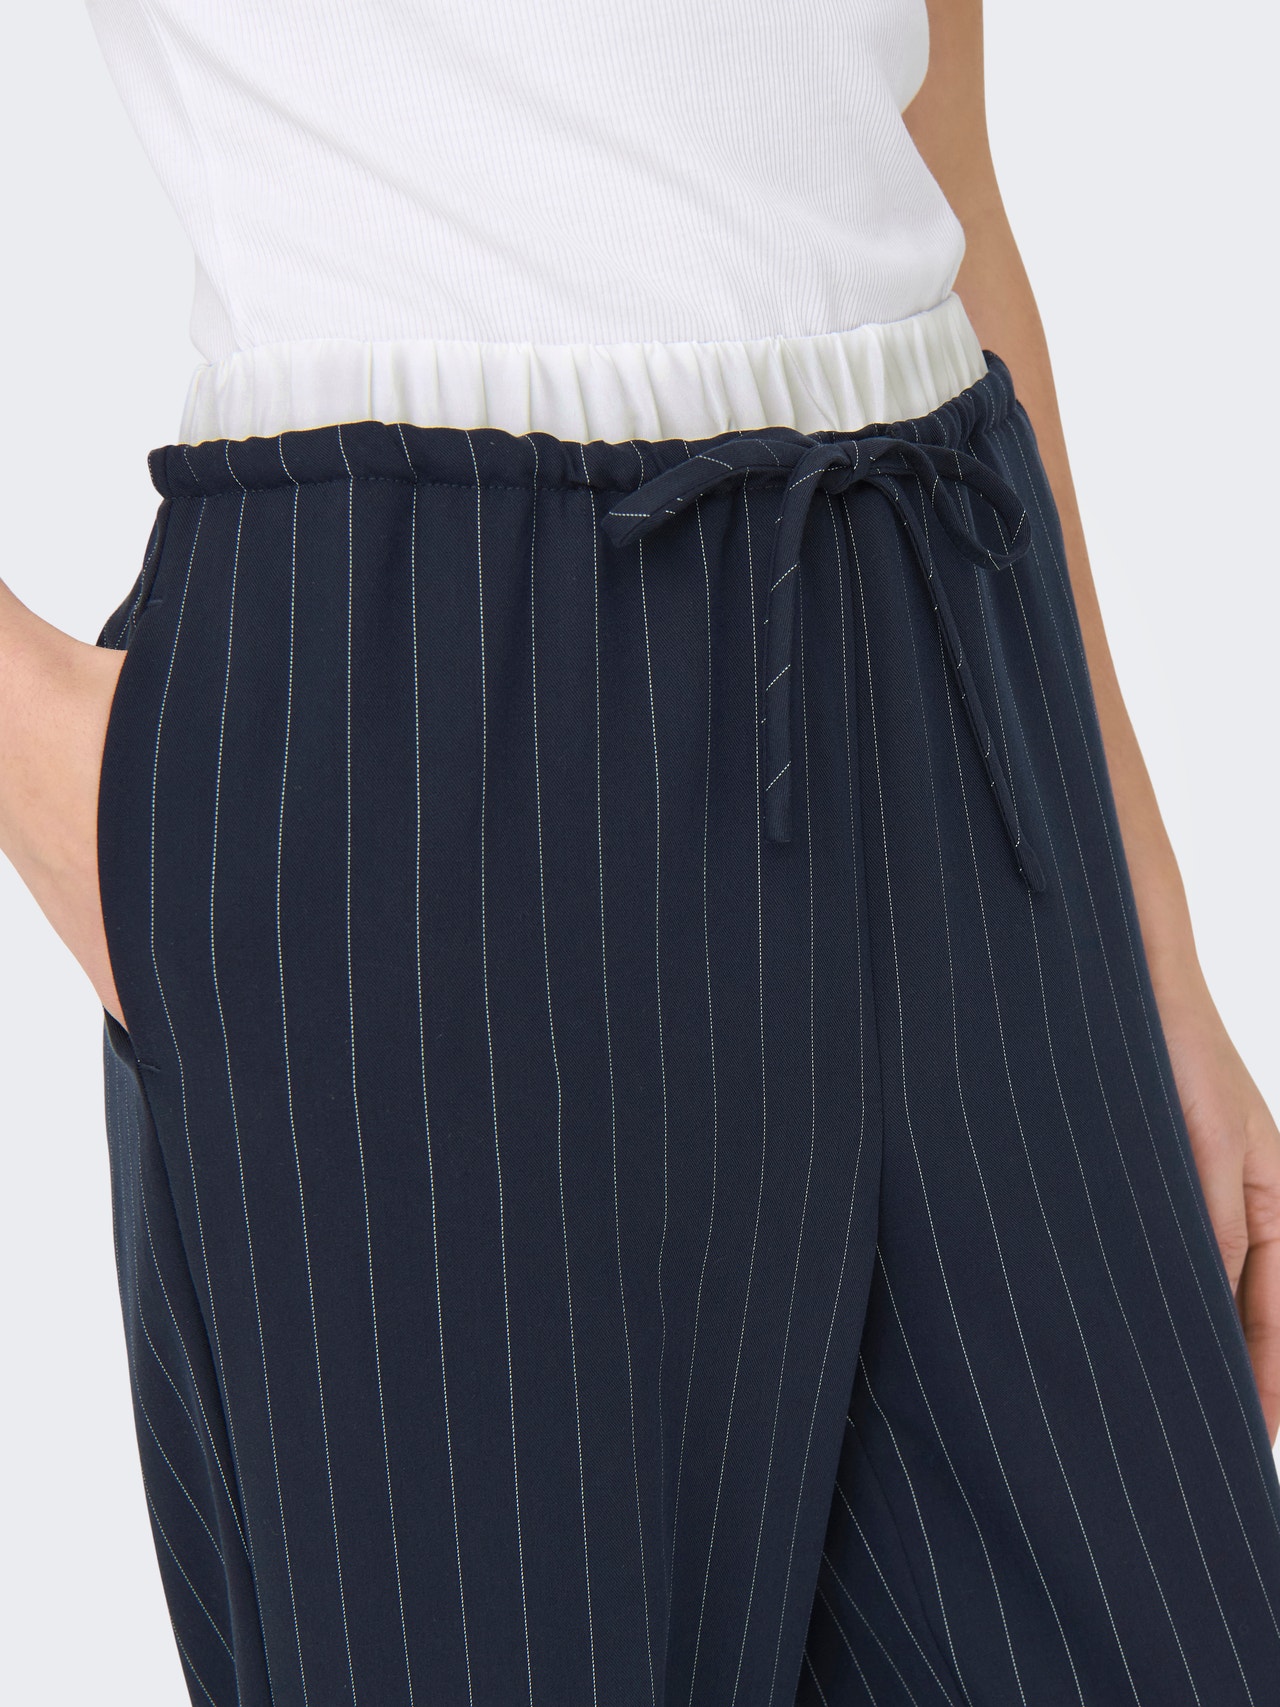 ONLY Trousers with high waist -Salute - 15339242